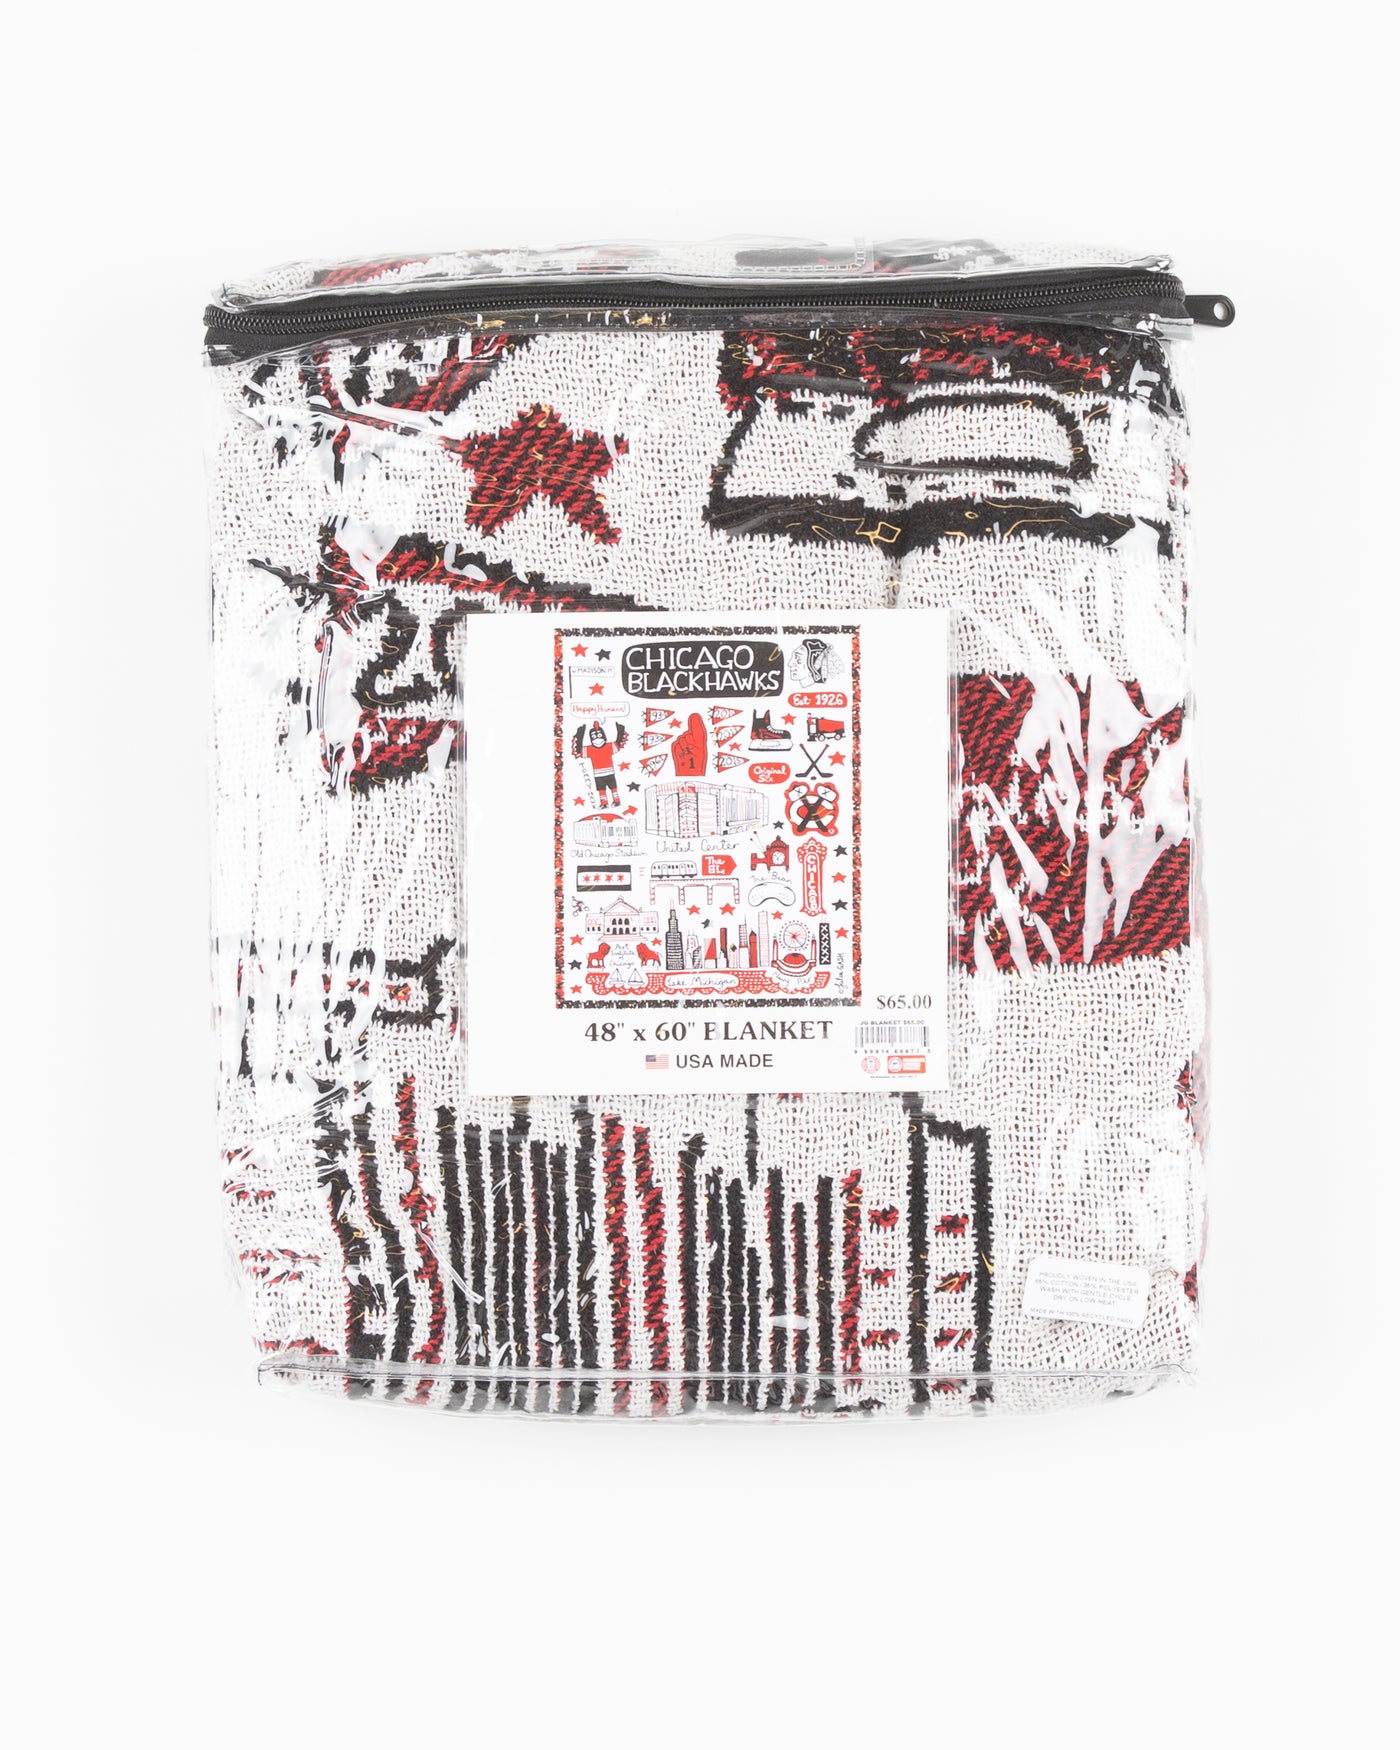 Julia Gash blanket with Chicago and Chicago Blackhawks inspired all over design - front lay flat with packaging